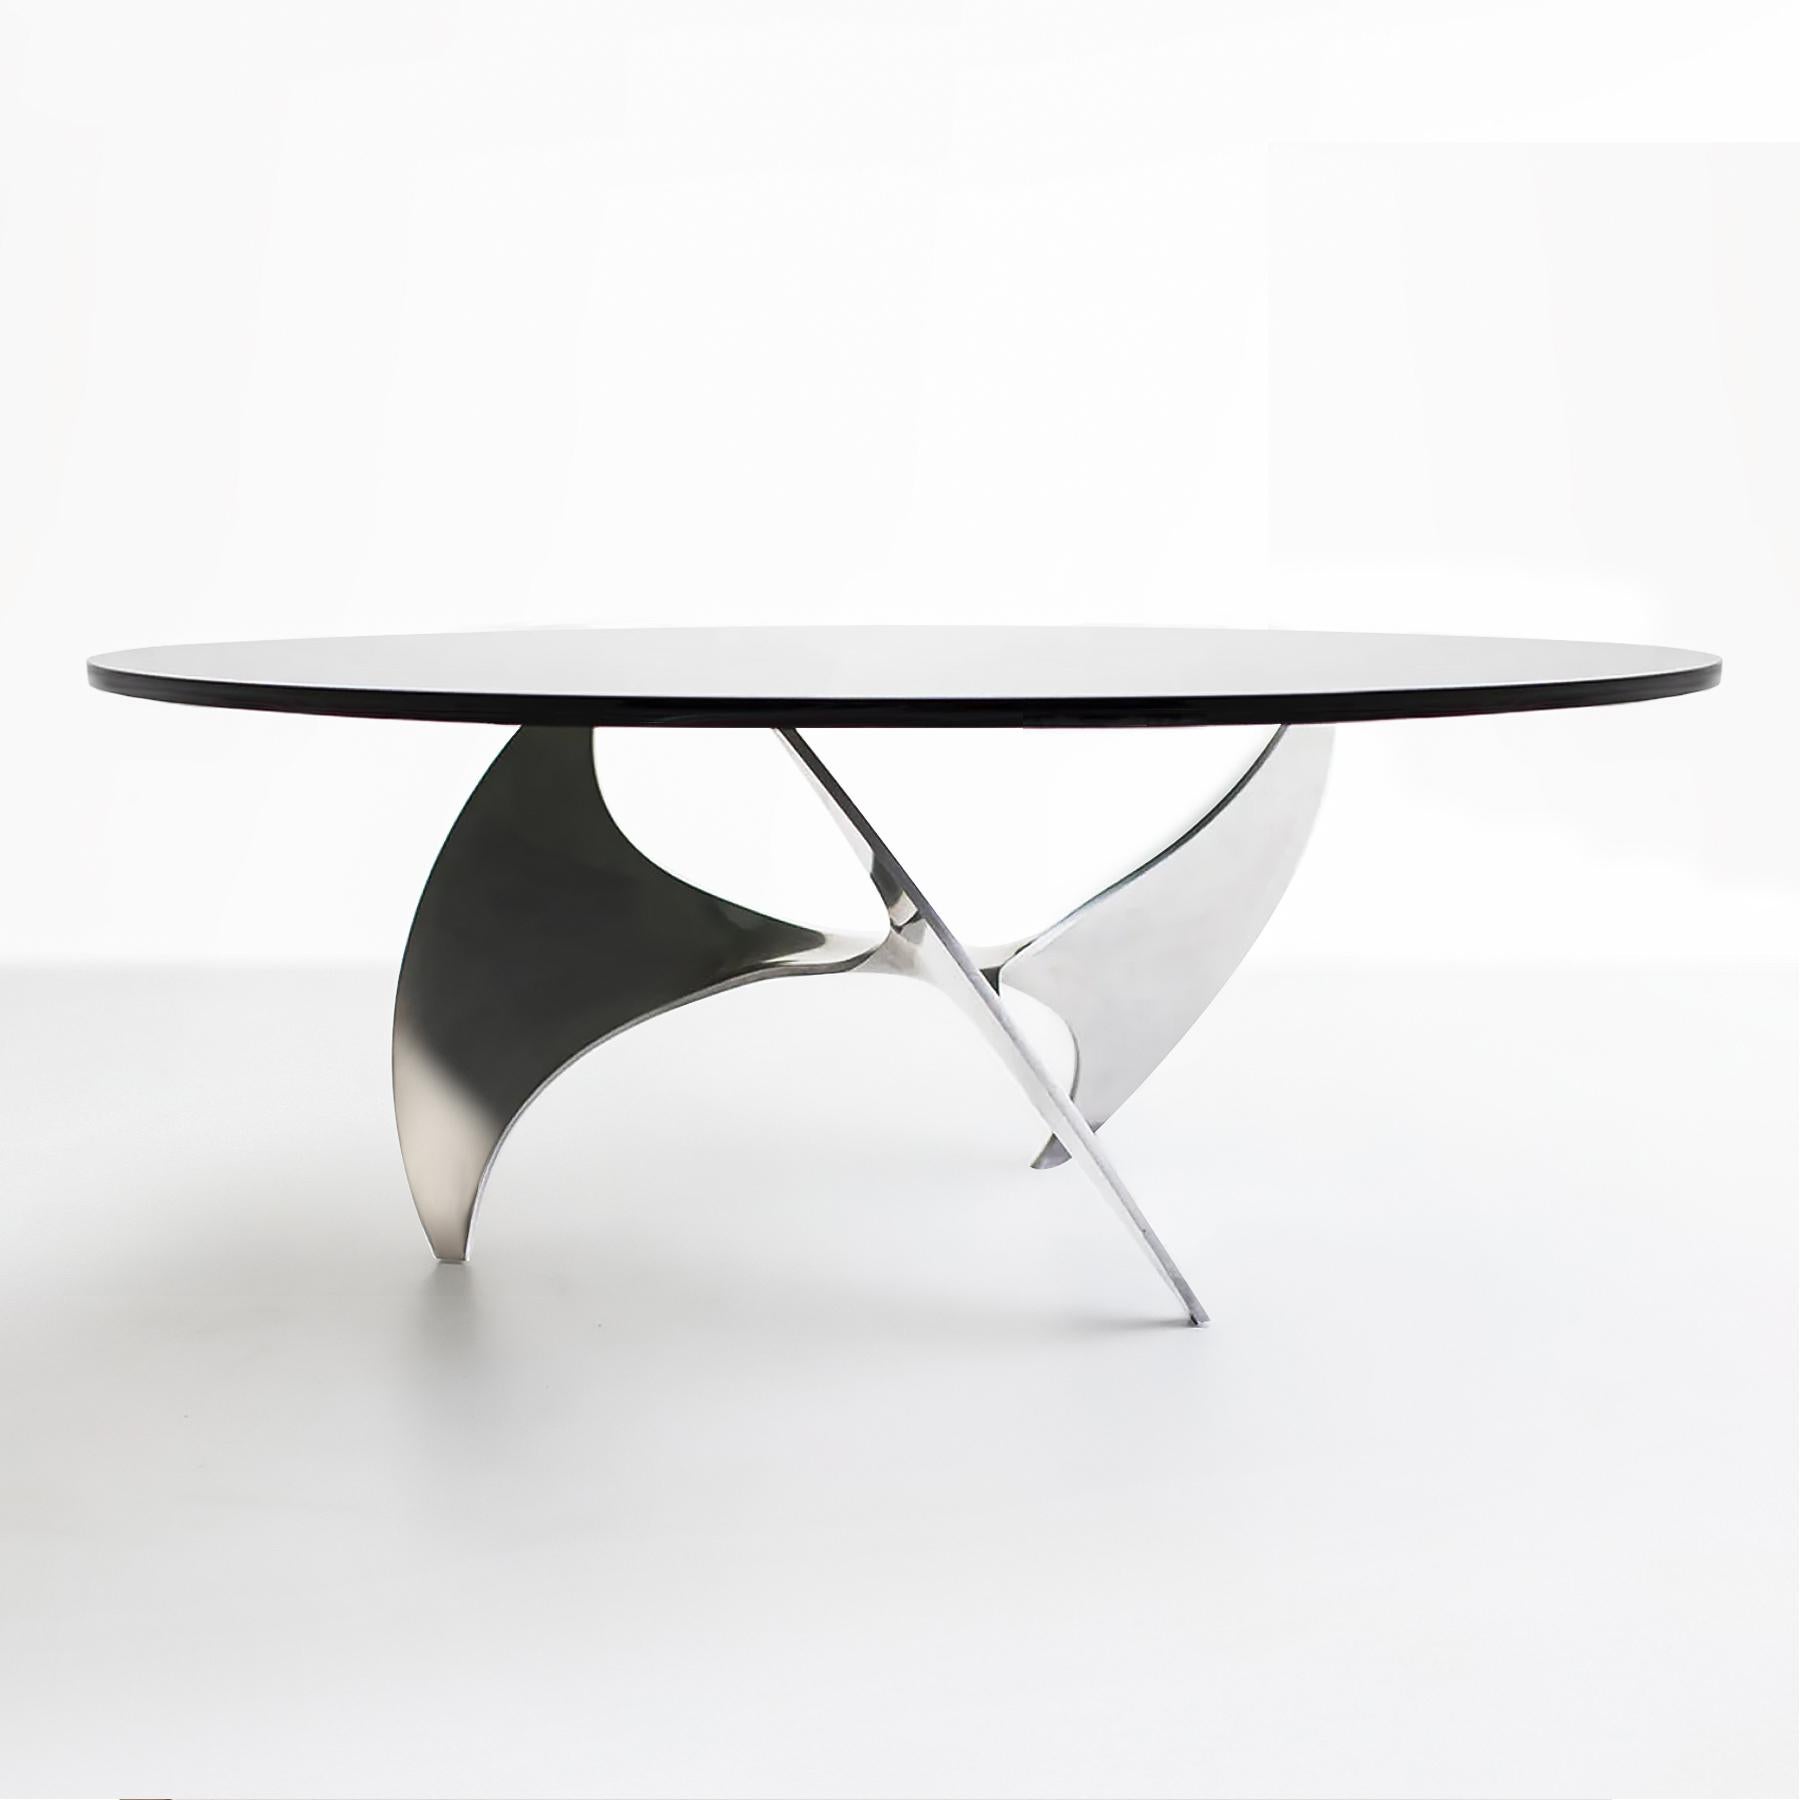 Vintage 1960s Aluminium and Glass Coffee ‘Propeller’ Table by Knut Hesterberg for Ronald Schmitt with the original thick glass 110cm diameter top.

This eye catching Mid Century Modern glass and Aluminium base coffee table was designed by Knut